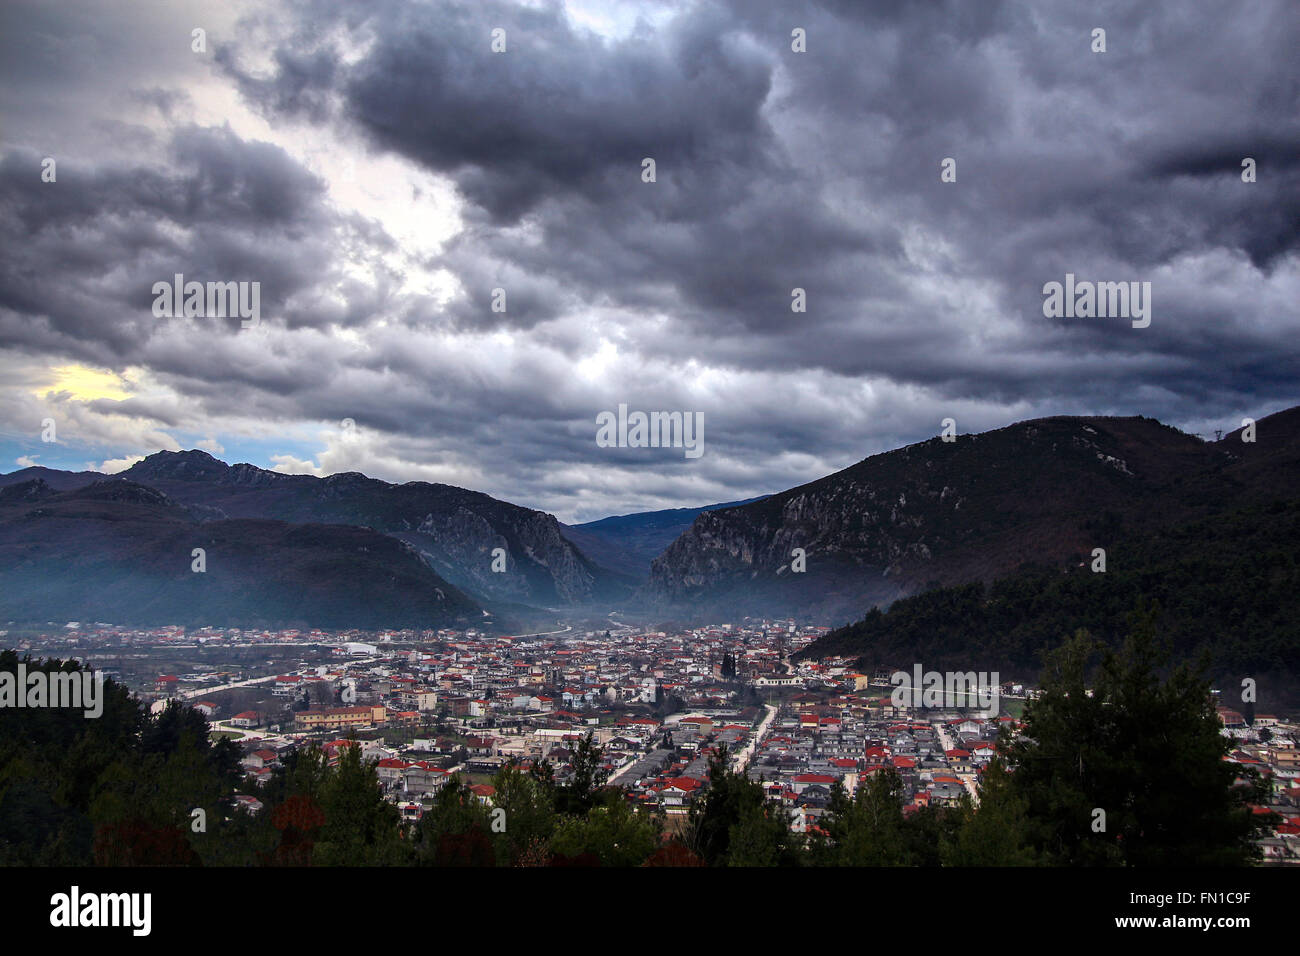 View from above,village in the valley, Greece Stock Photo